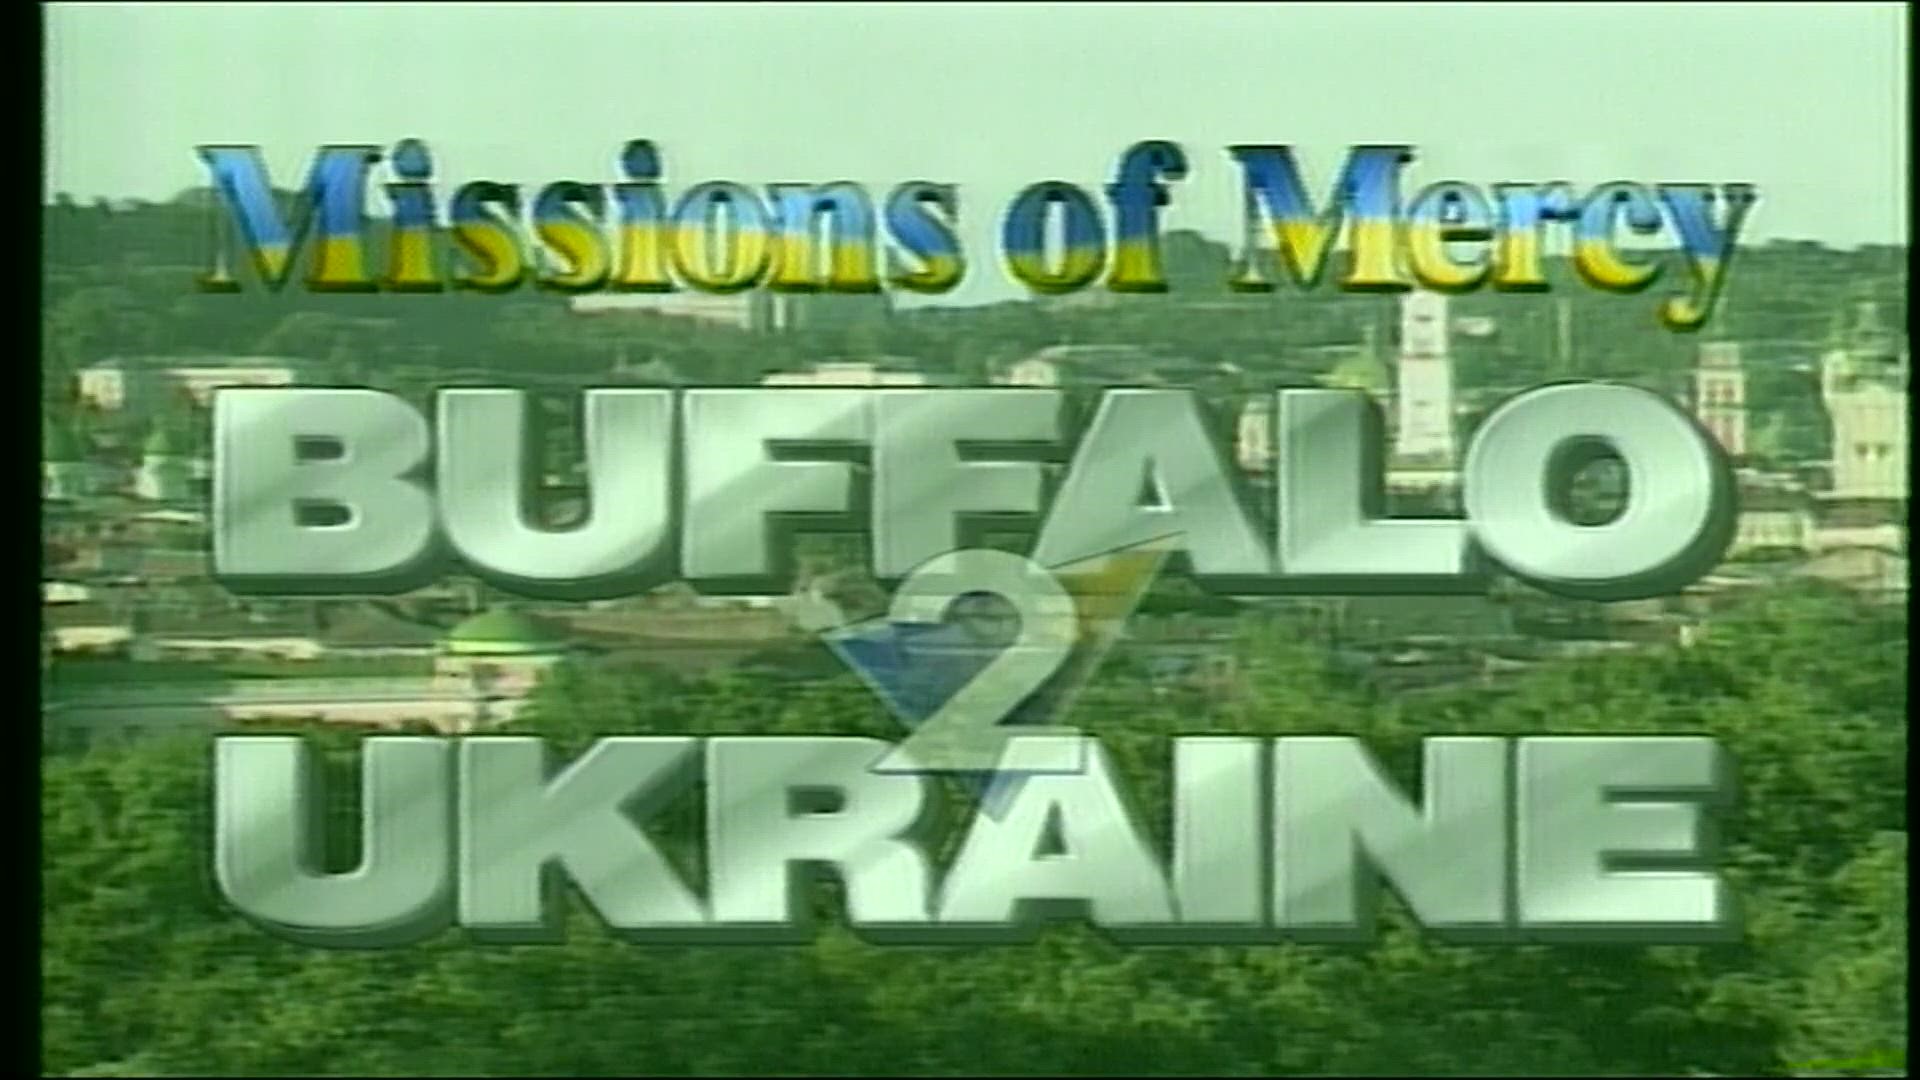 Rich Kellman introduces the Buffalo 2 Ukraine: Revisited series, which he worked on with 2 On Your Side photojournalist Jerry Gasser. They visited Ukraine in 1994.